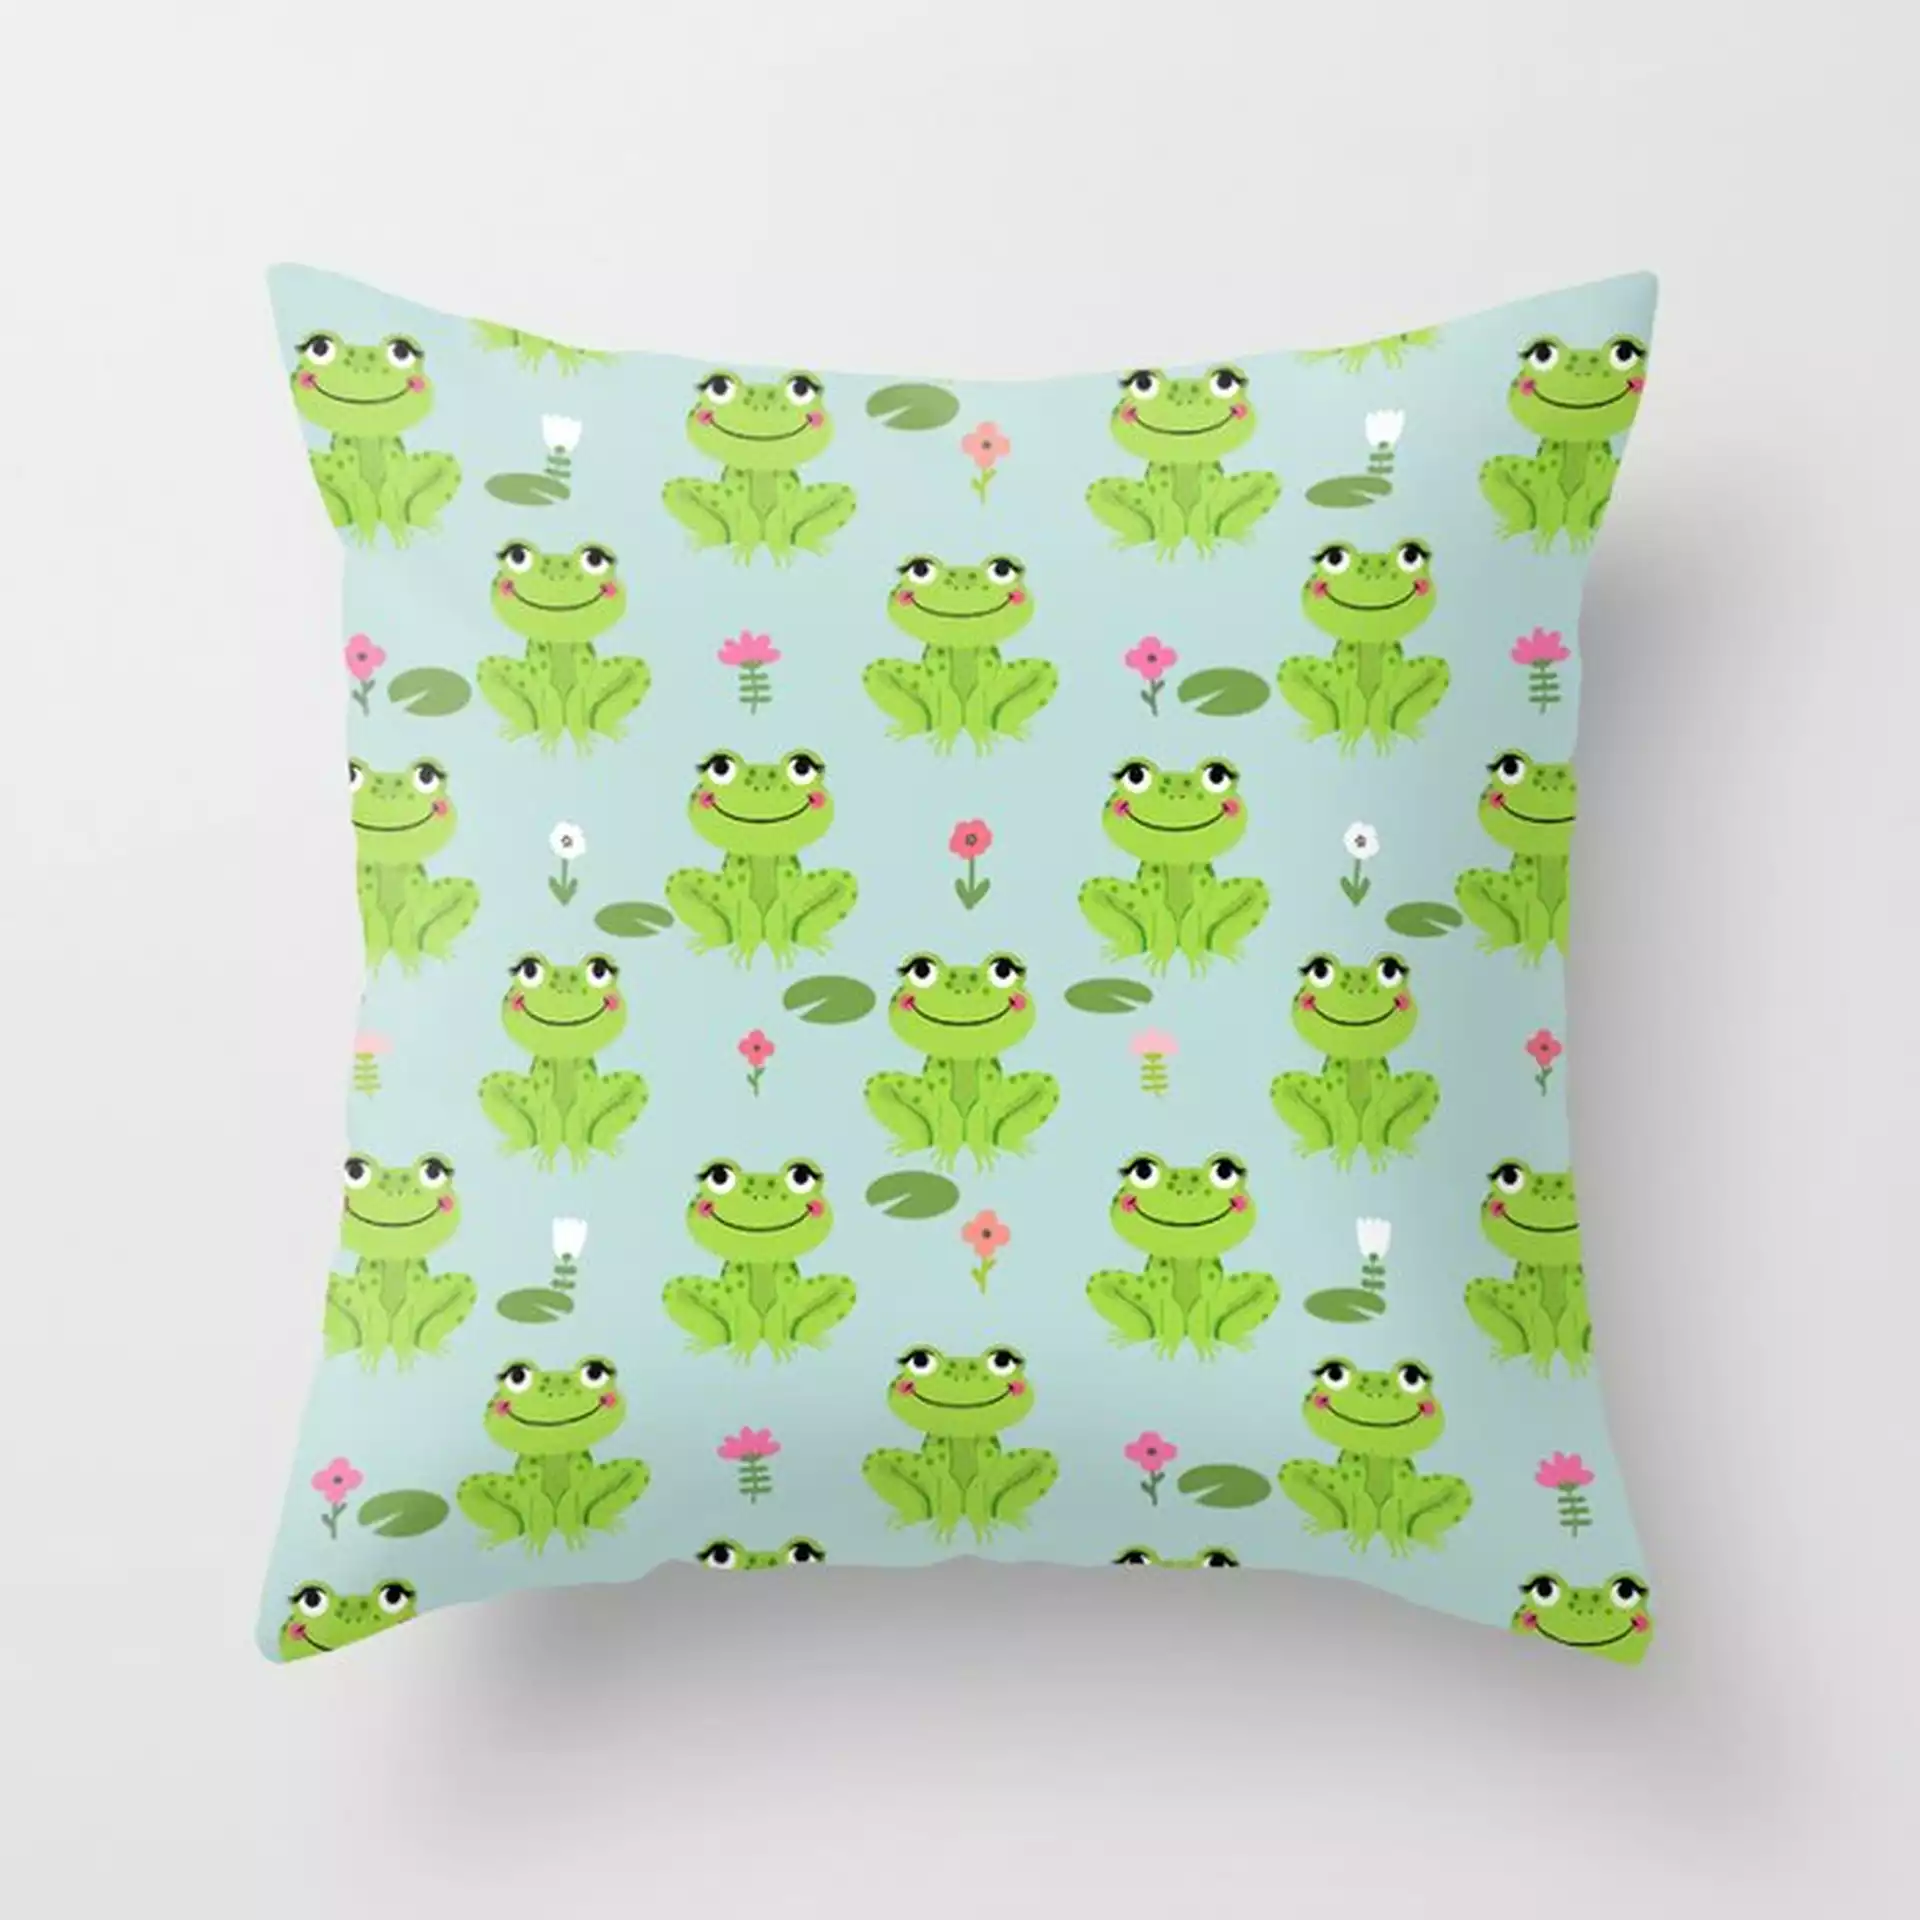 Frog Cute Kids Room Decor Boys Room Baby Nursery Couch Throw Pillow by Charlottewinter - Cover (18" x 18") with pillow insert - Indoor Pillow